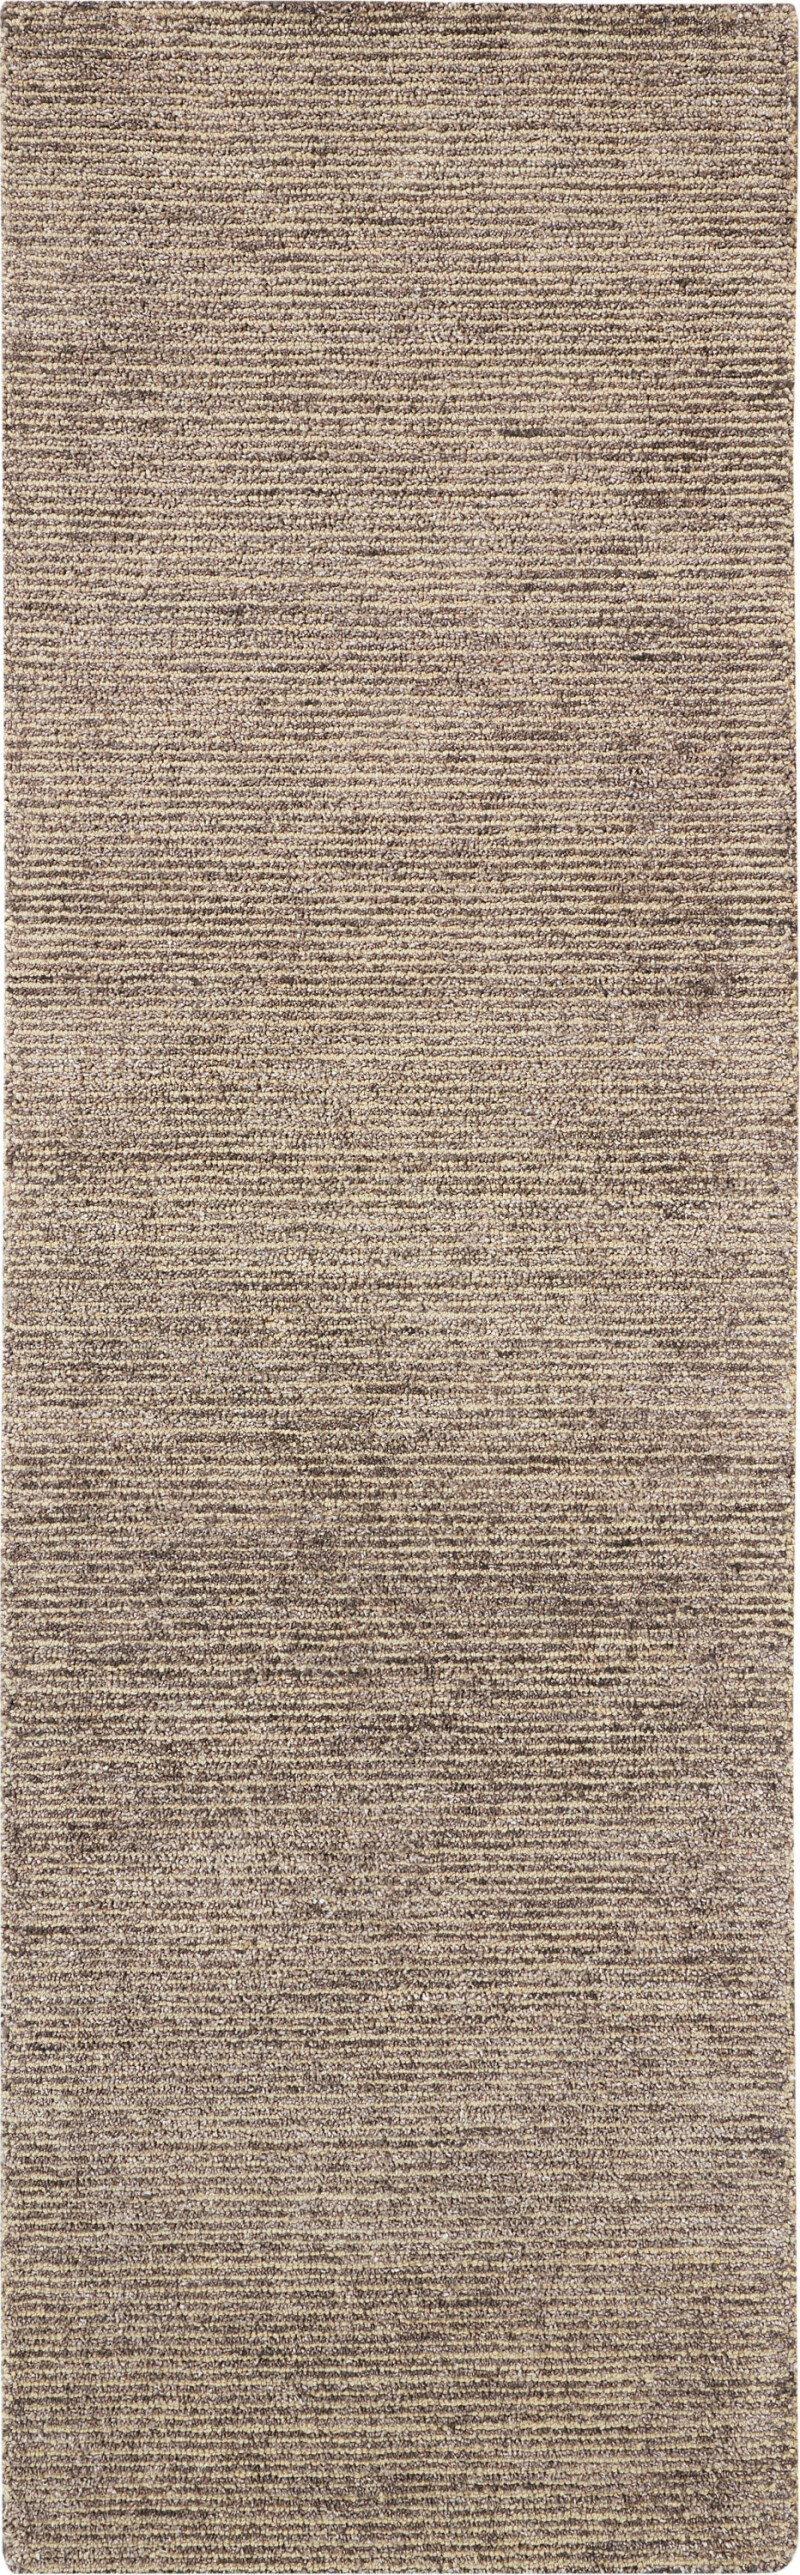 Wes01 Charcoal Nourison Weston Runner Area Rug